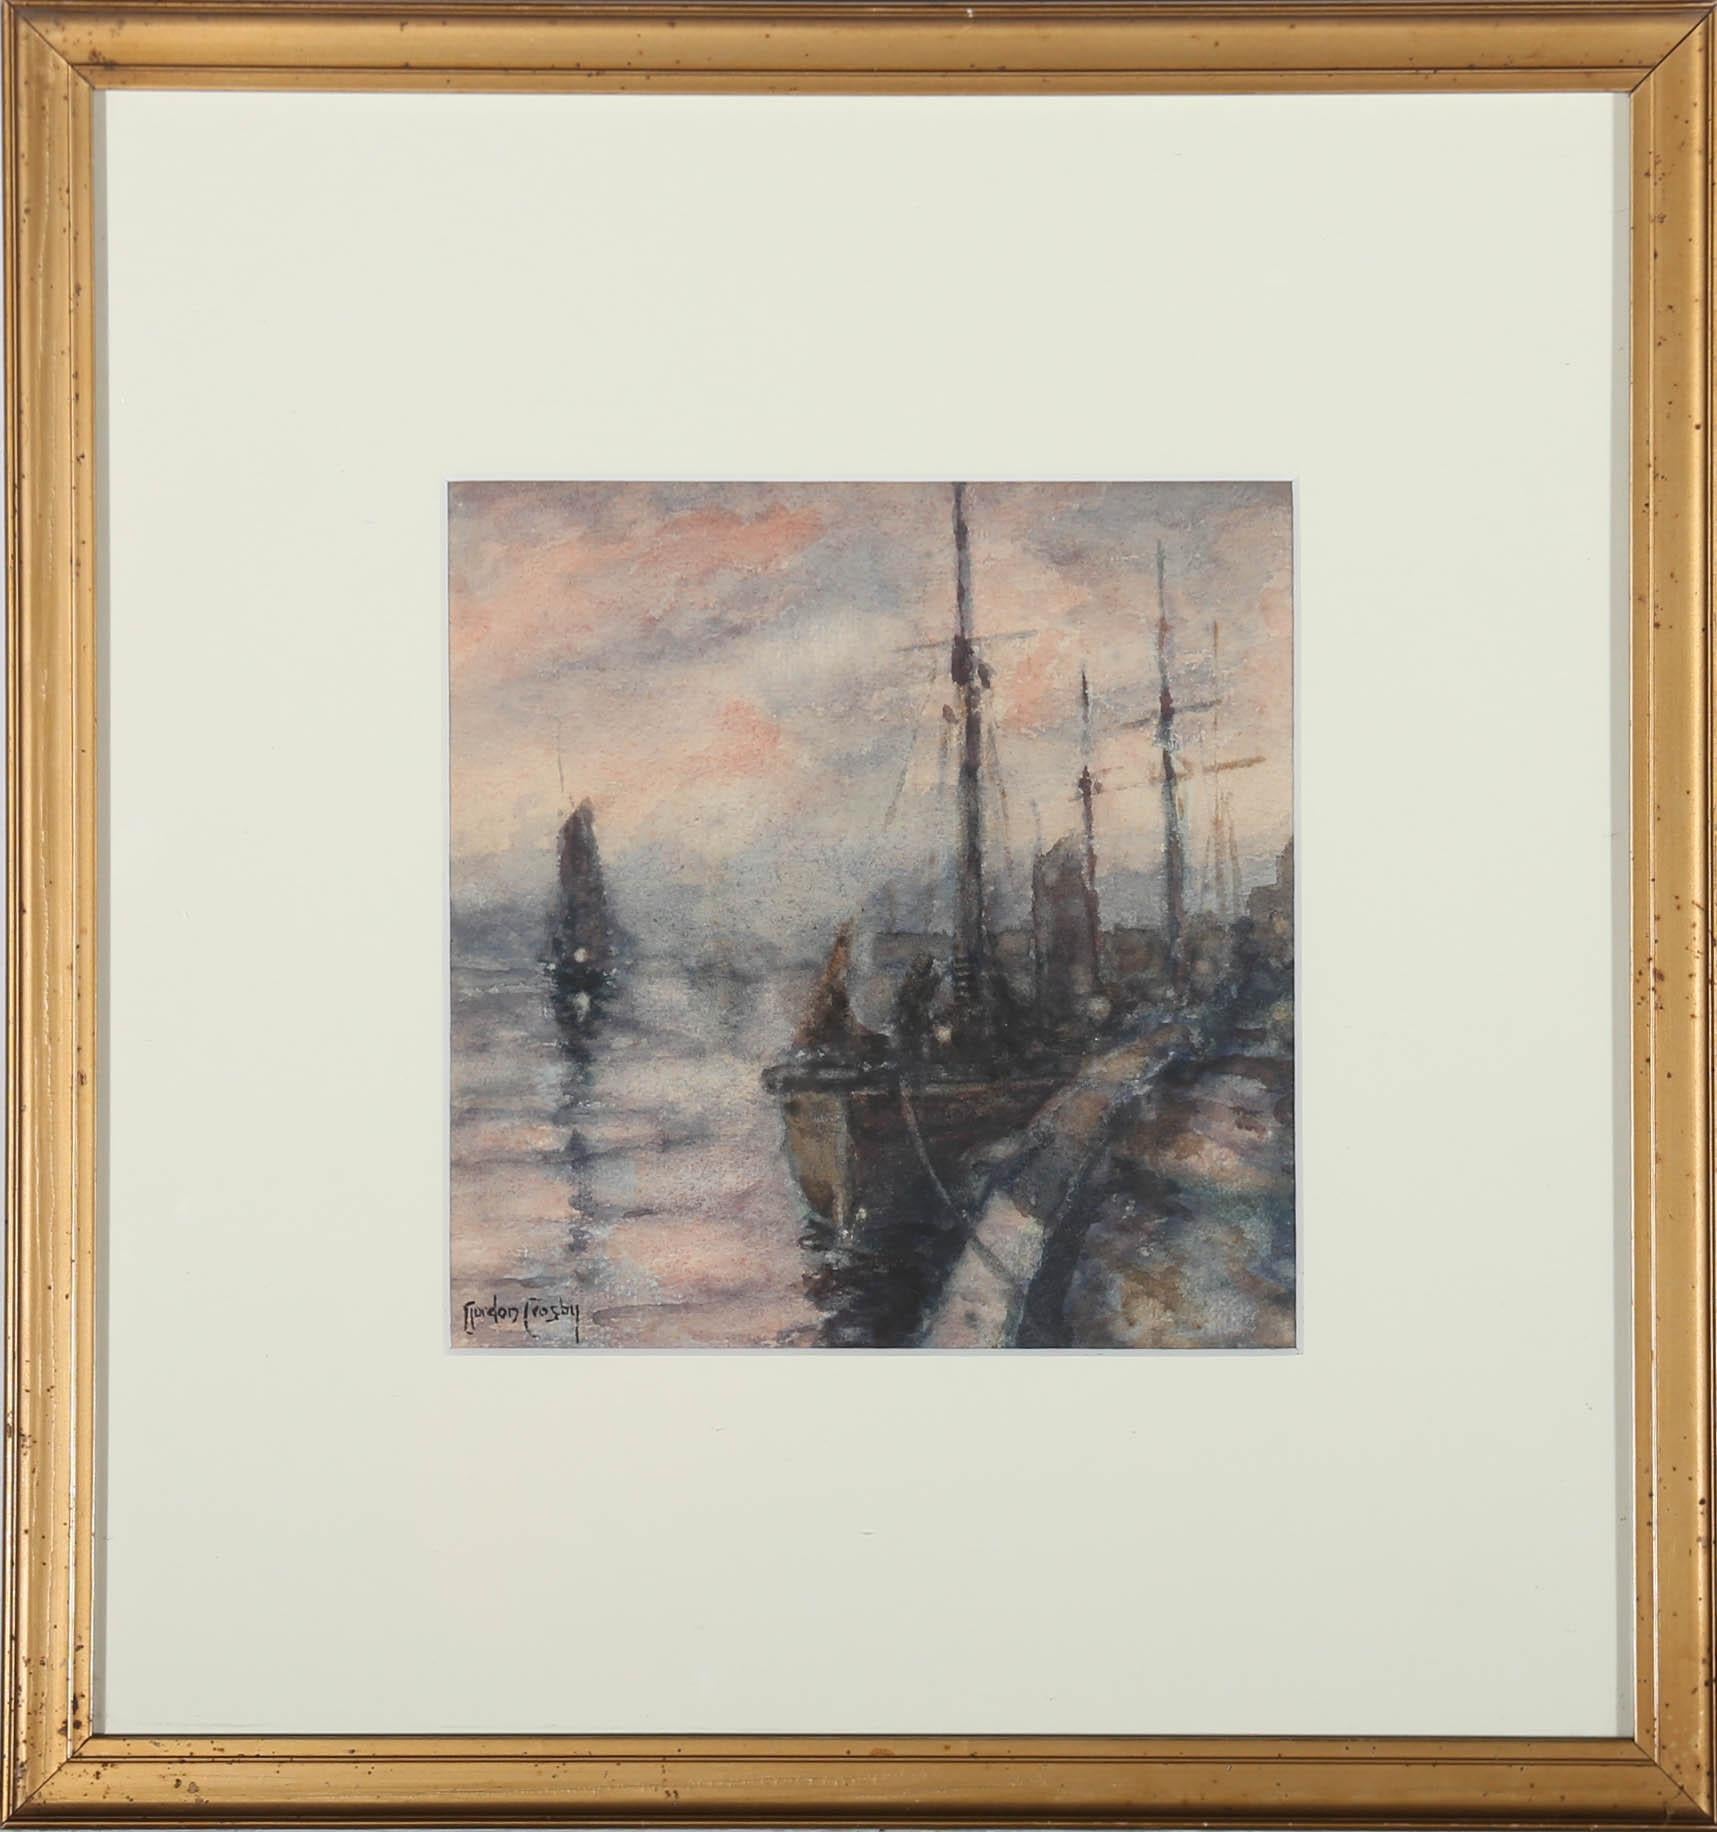 A charming scene depicting boats moored along the quay at sunset. The artist captures the scene in soft brushwork, letting the lightness of the watercolours create a tranquil and hazy atmosphere. Signed to the lower right. Presented in a gilt frame